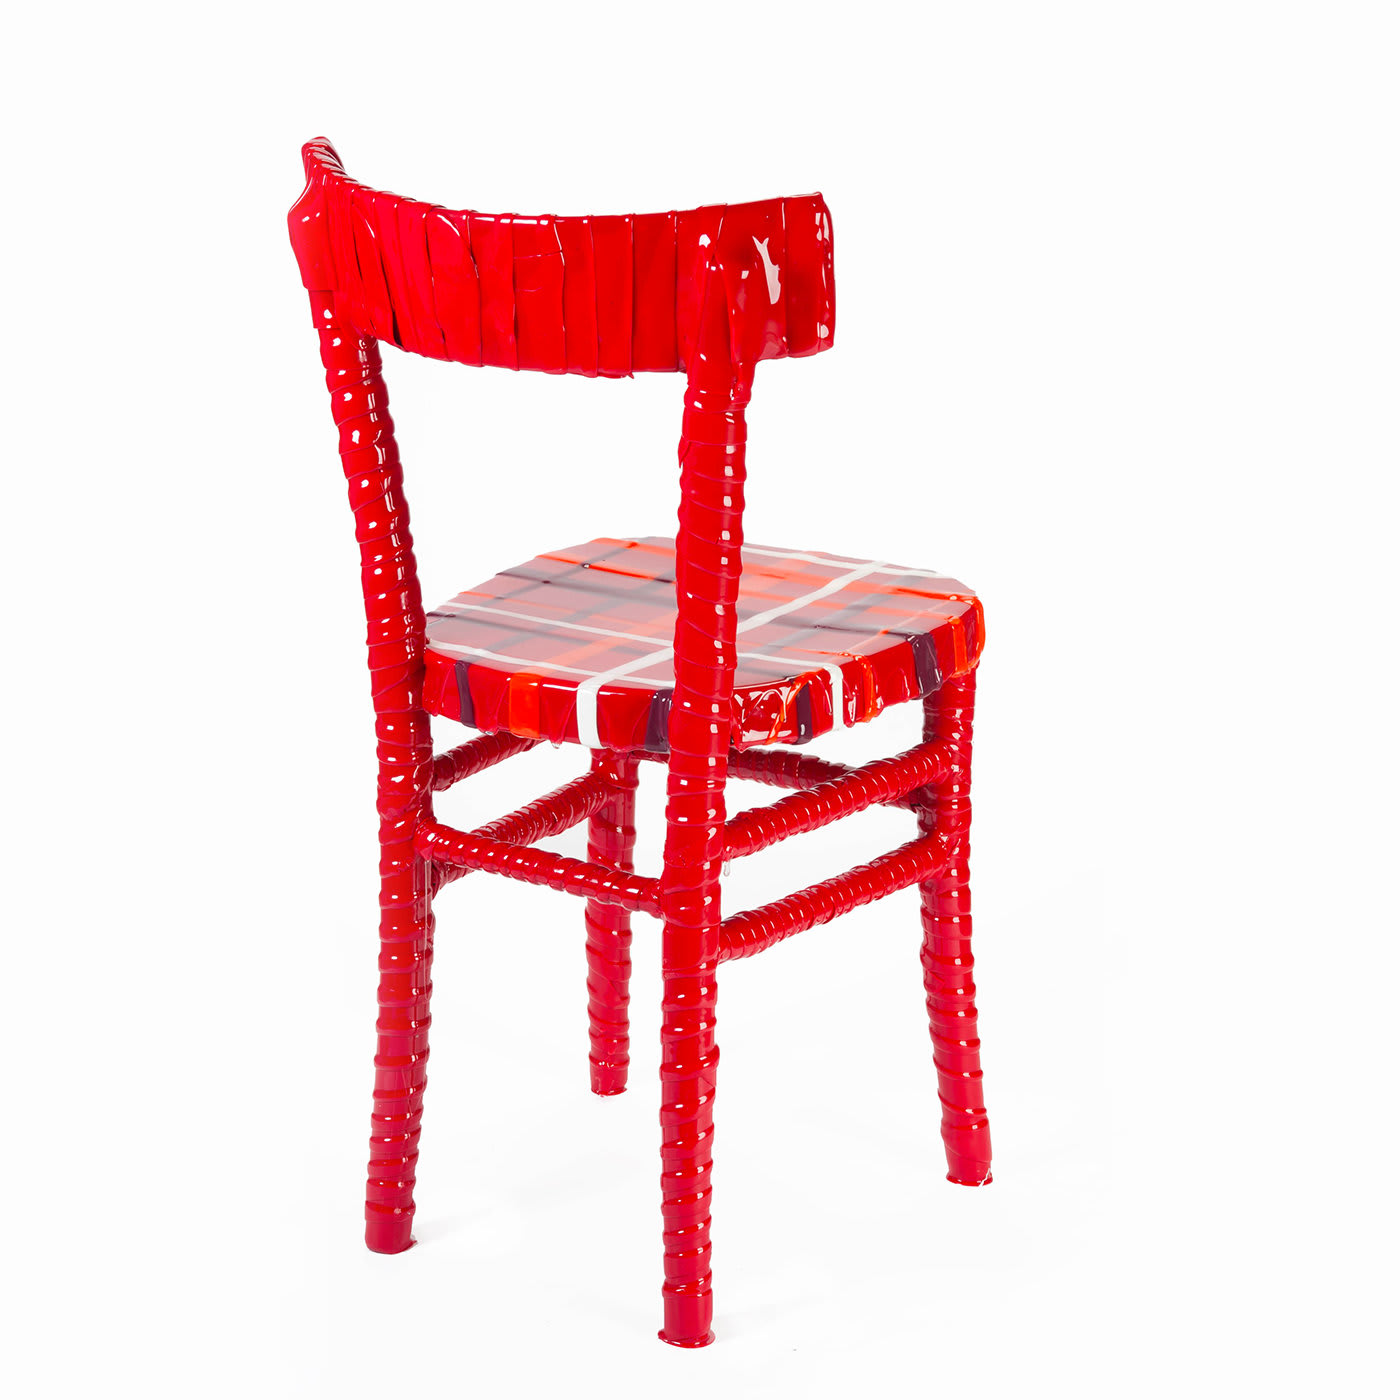 N. 02/20 One-Off striped red resin chair by Paola Navone - Corsi Design Factory